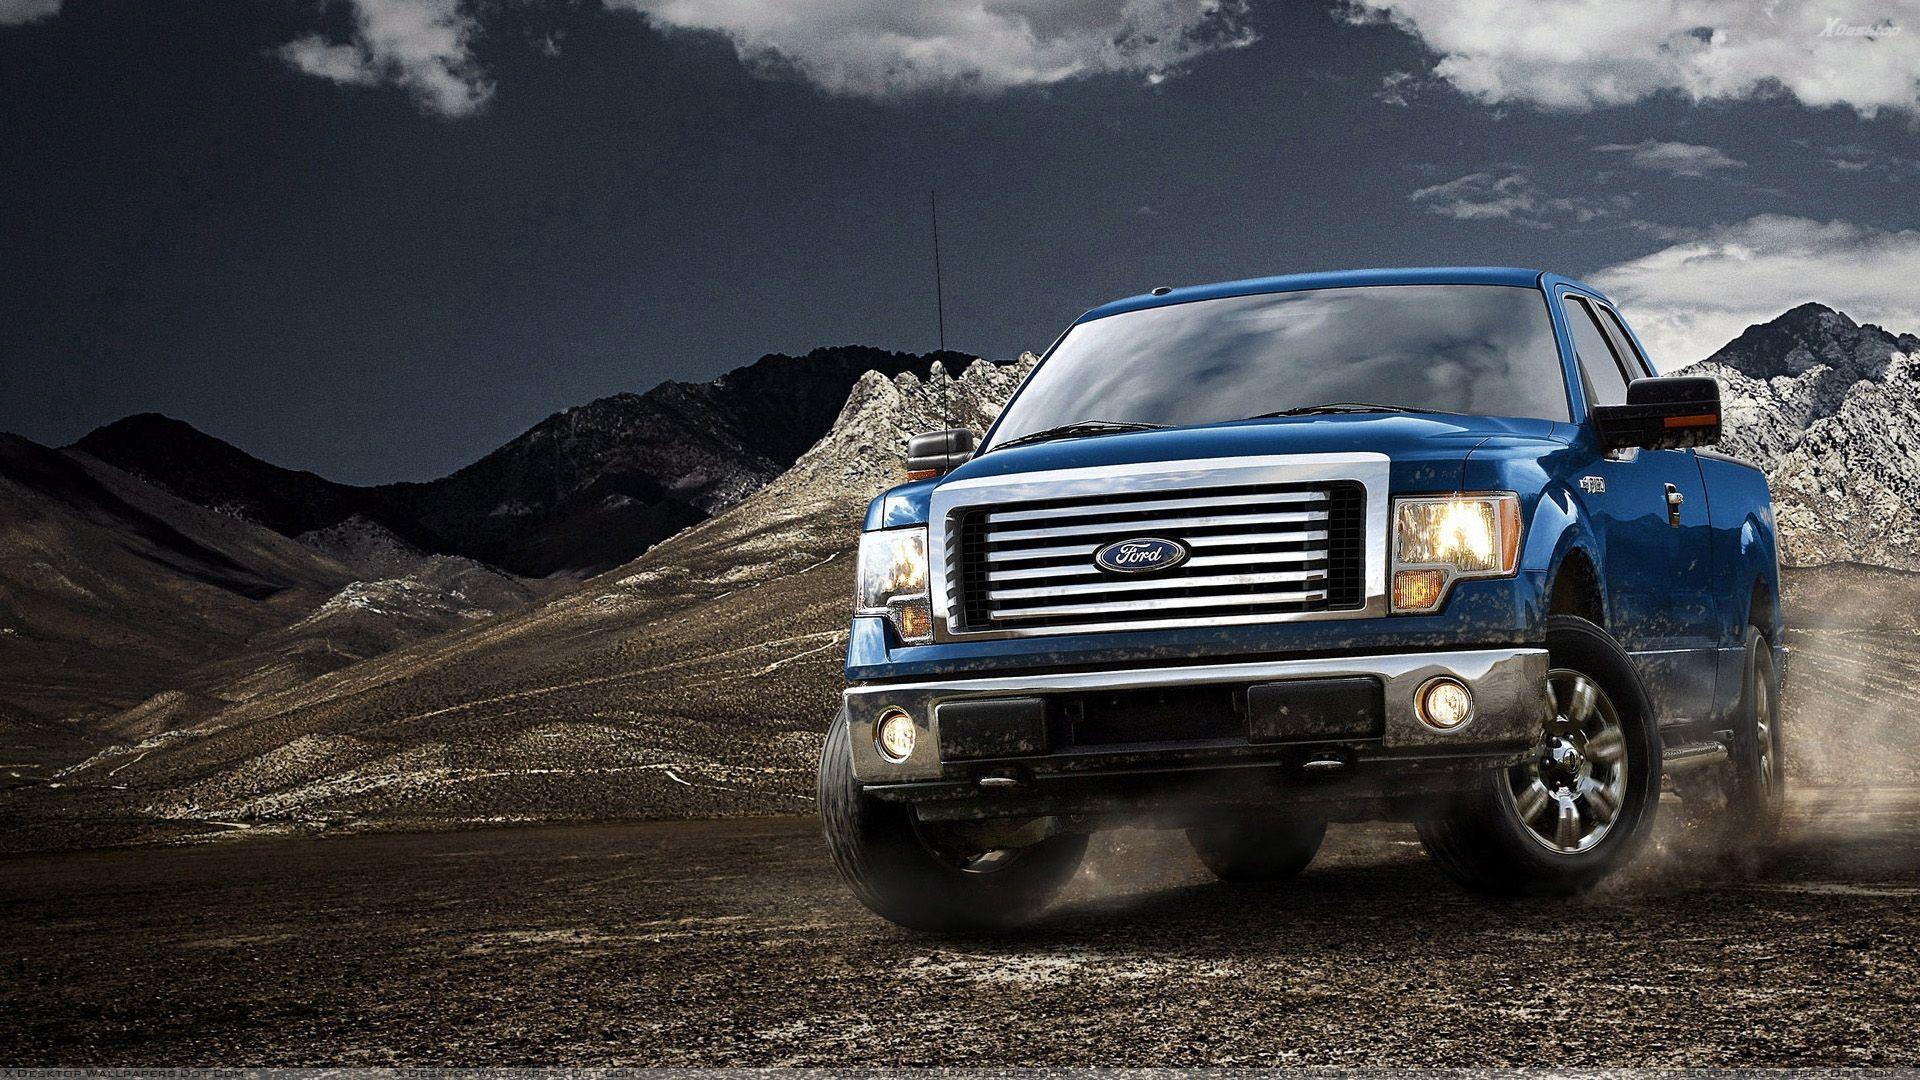 Ford F150 Wallpaper for PC, Mobile